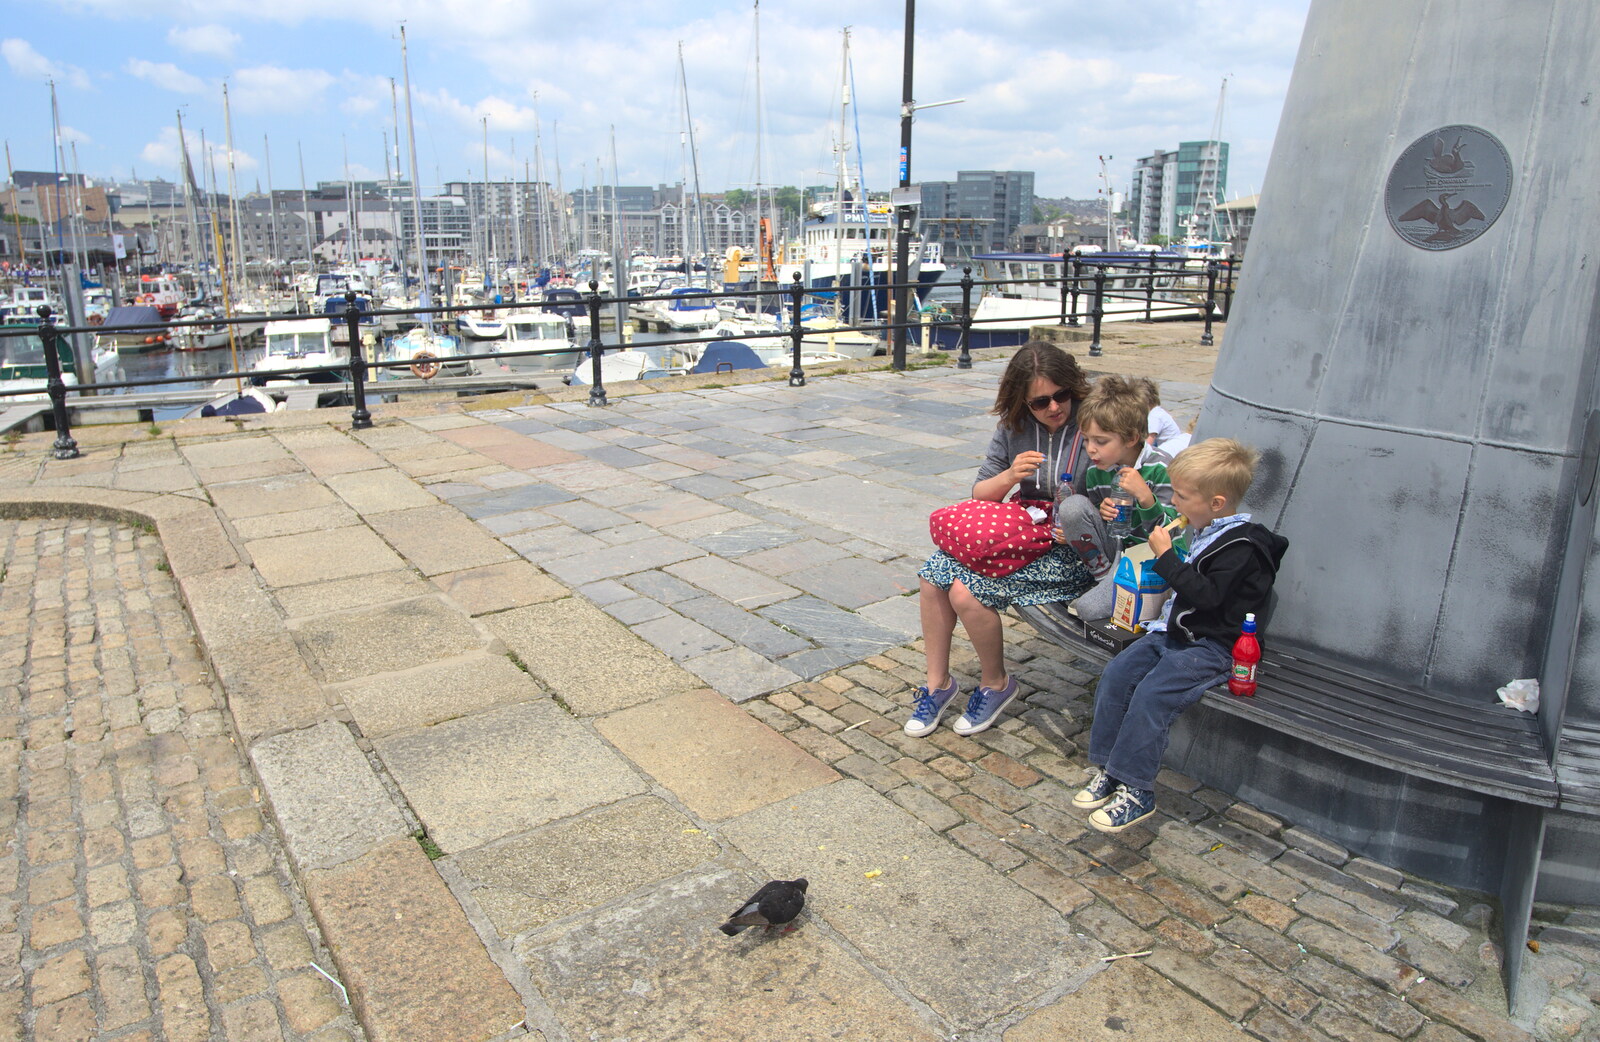 We eat our chips on the Mayflower pier from A Tamar River Trip, Plymouth, Devon - 30th May 2016